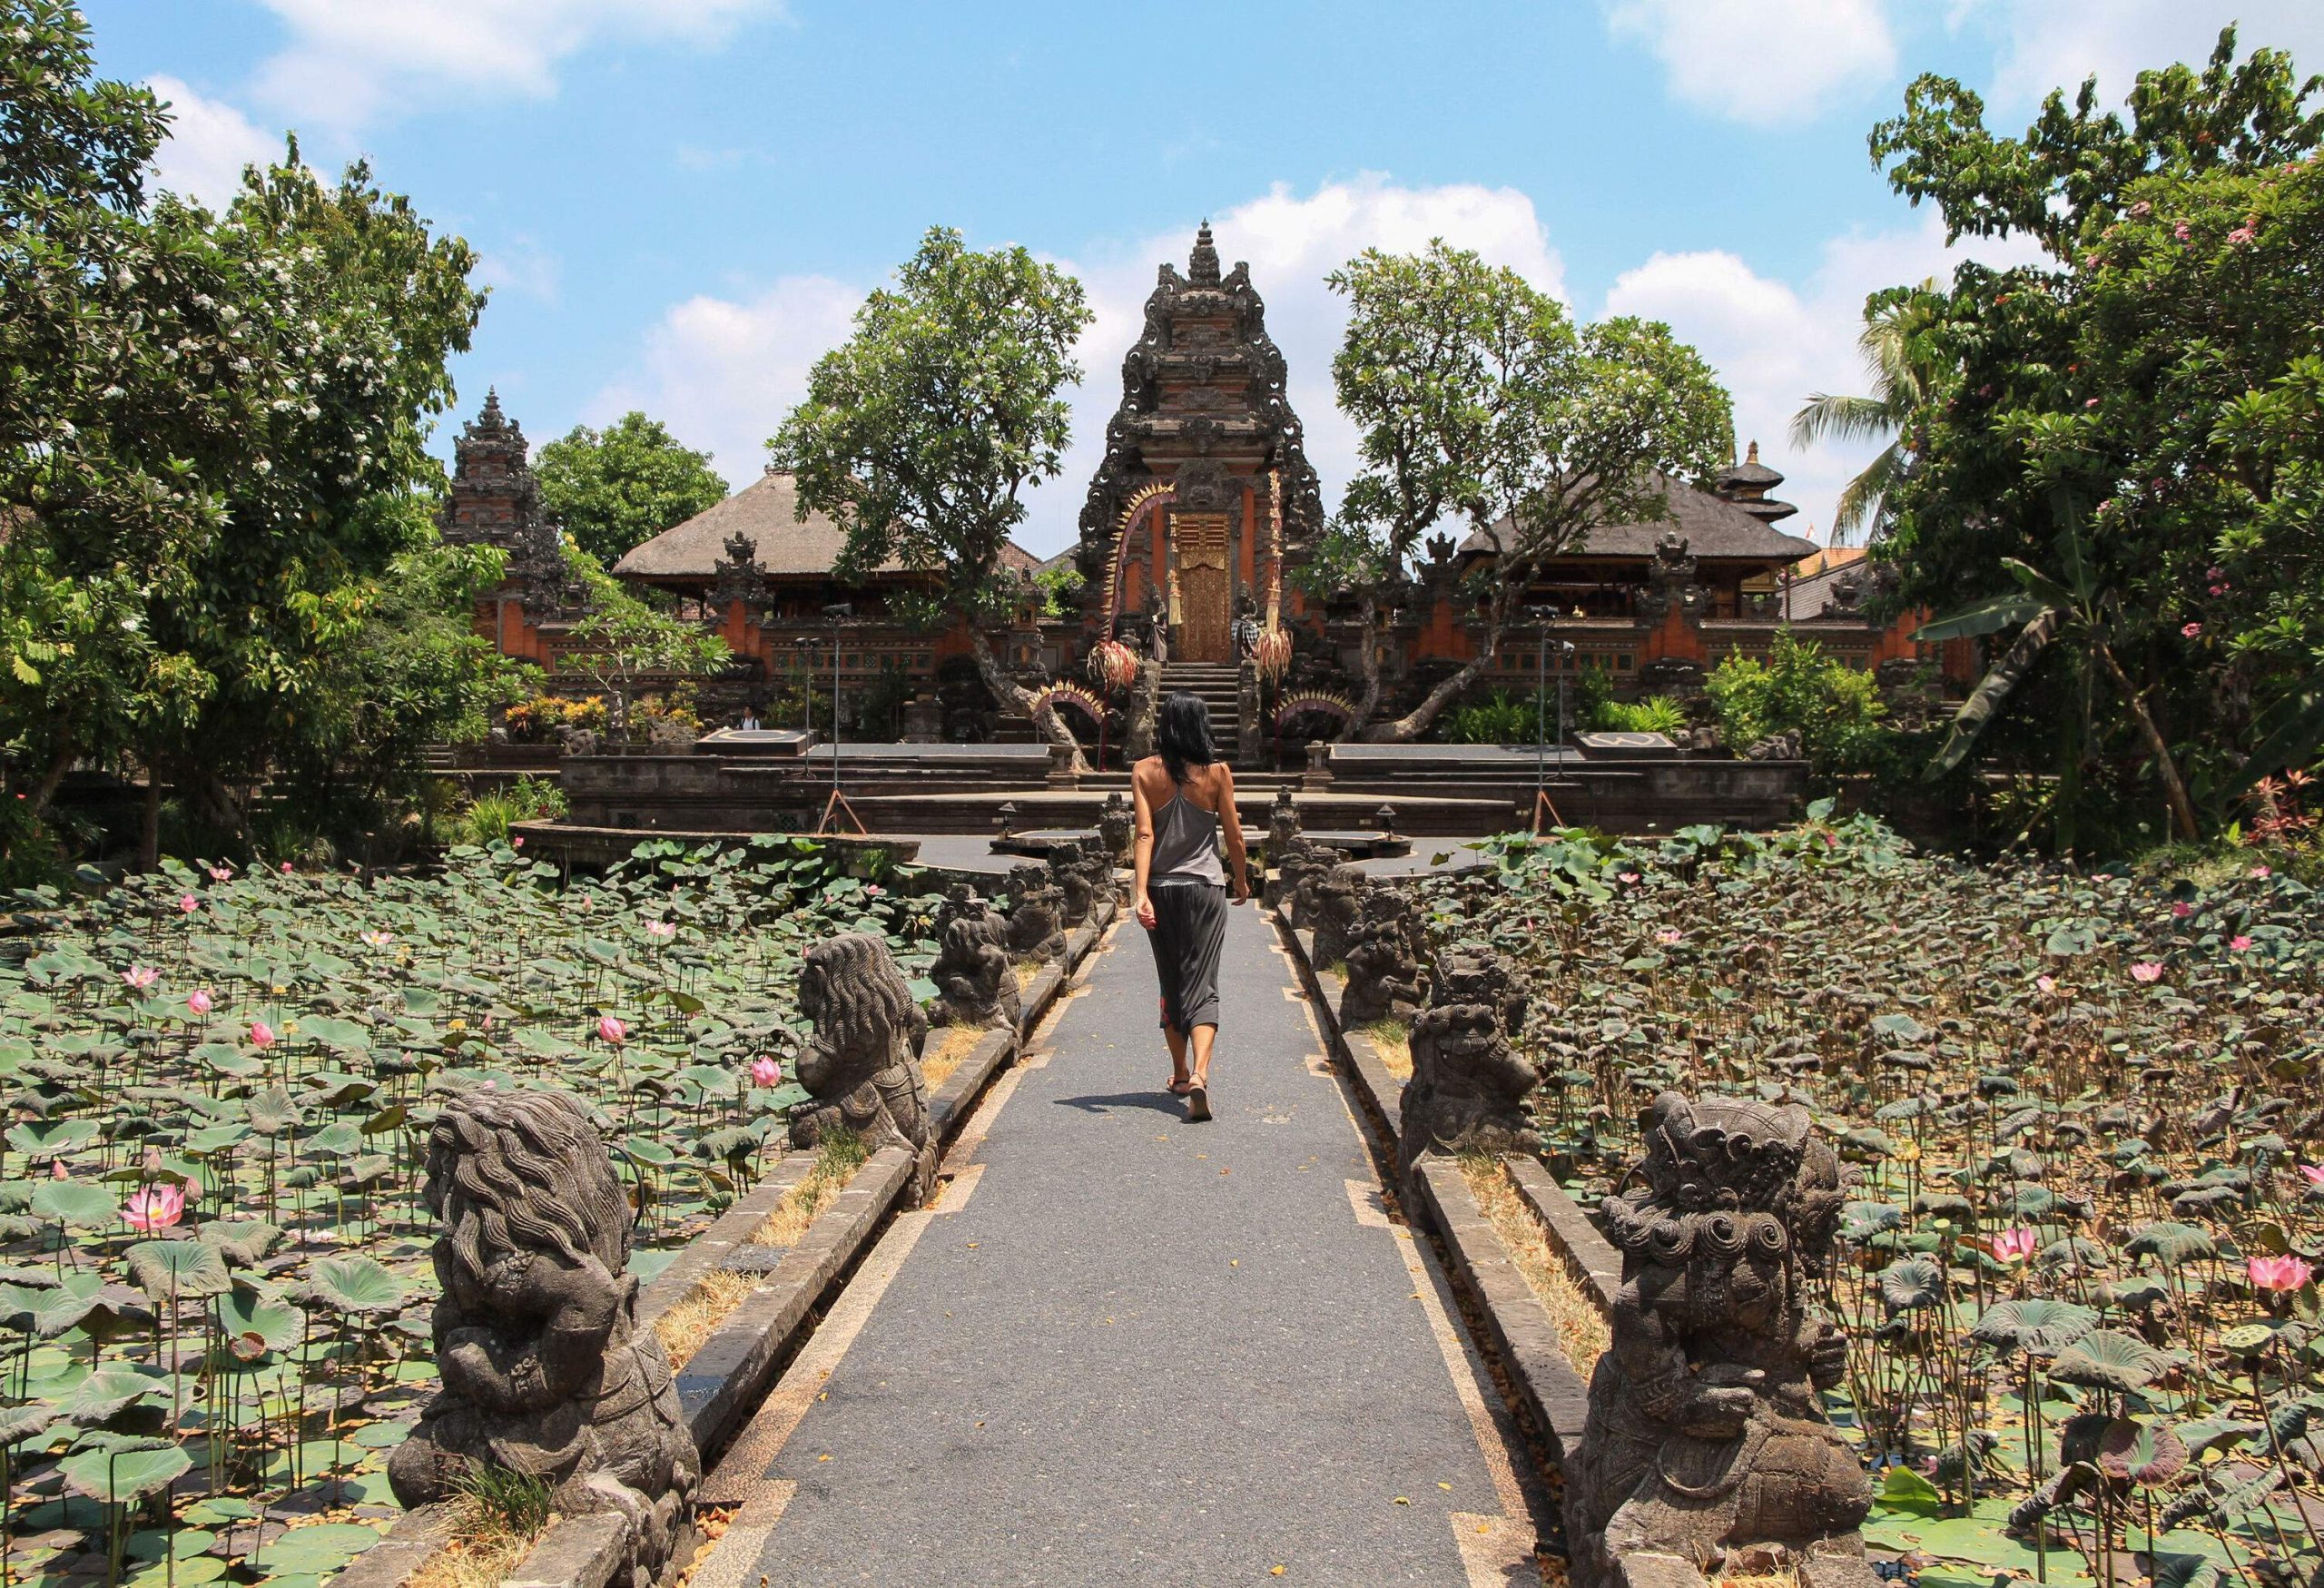 A woman strolling in the direction of a temple down a pavement lined with statues.